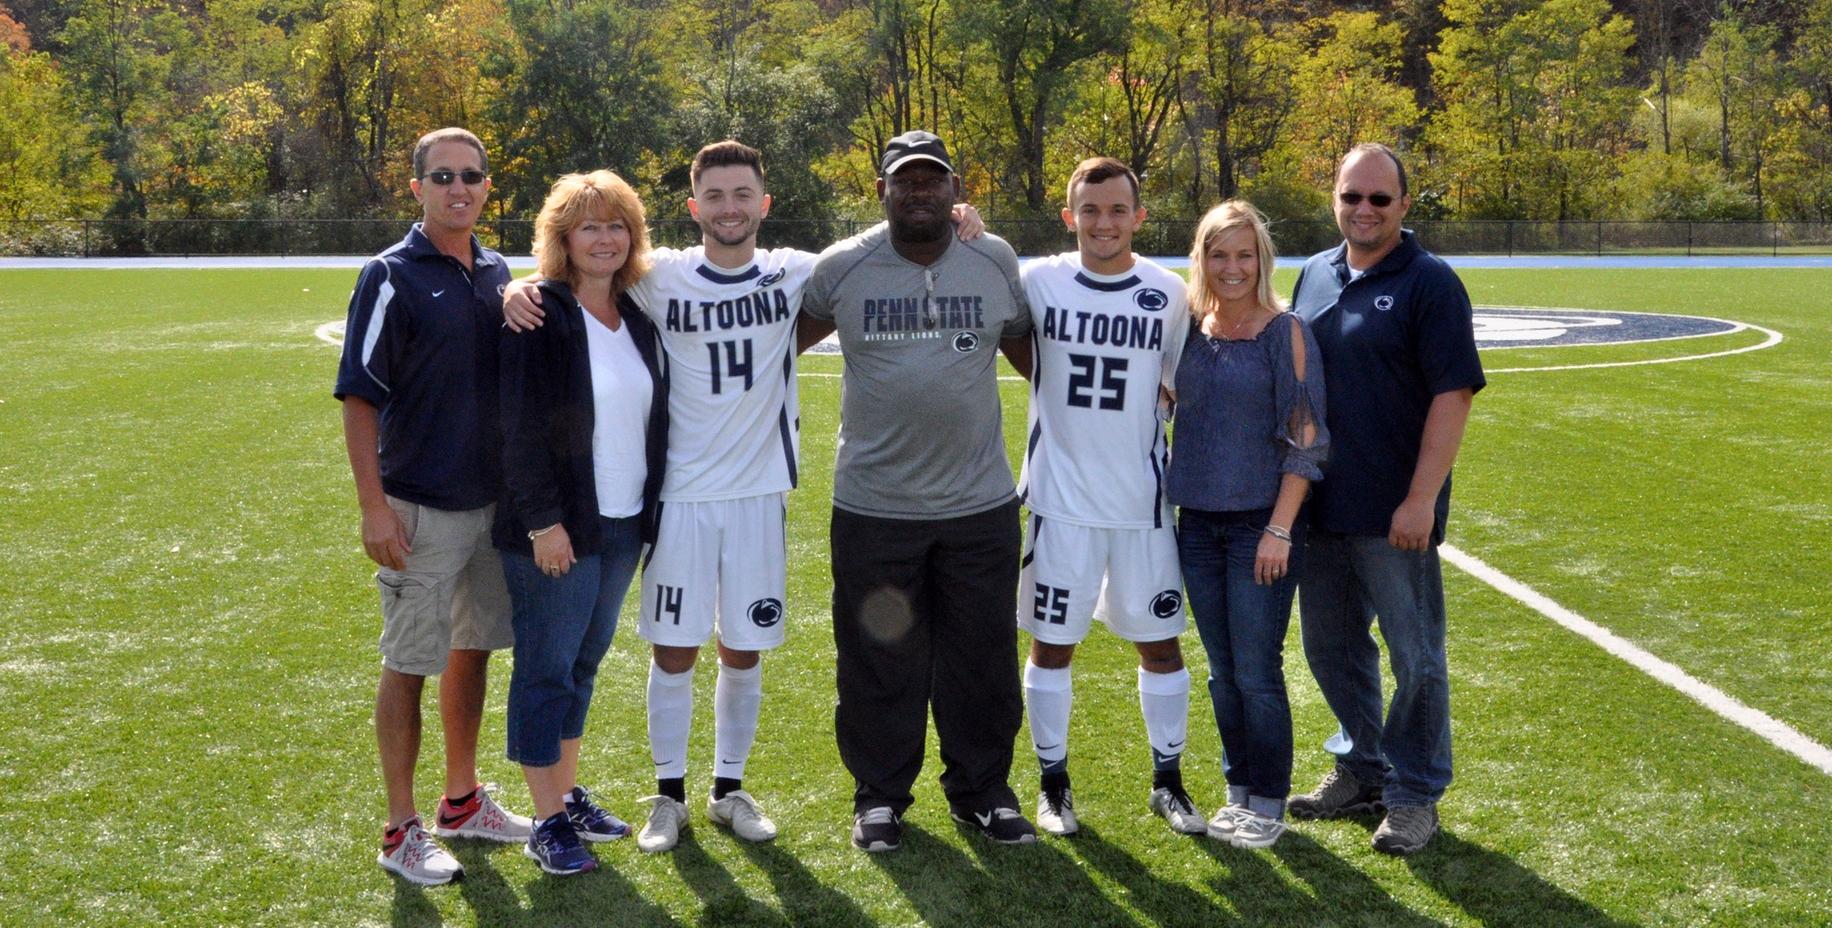 Photo: Penn State Altoona seniors #14 Seth Murrelle and #25 Coltin Ebersole pose with their families during the pregame Senior Day ceremony on Saturday.